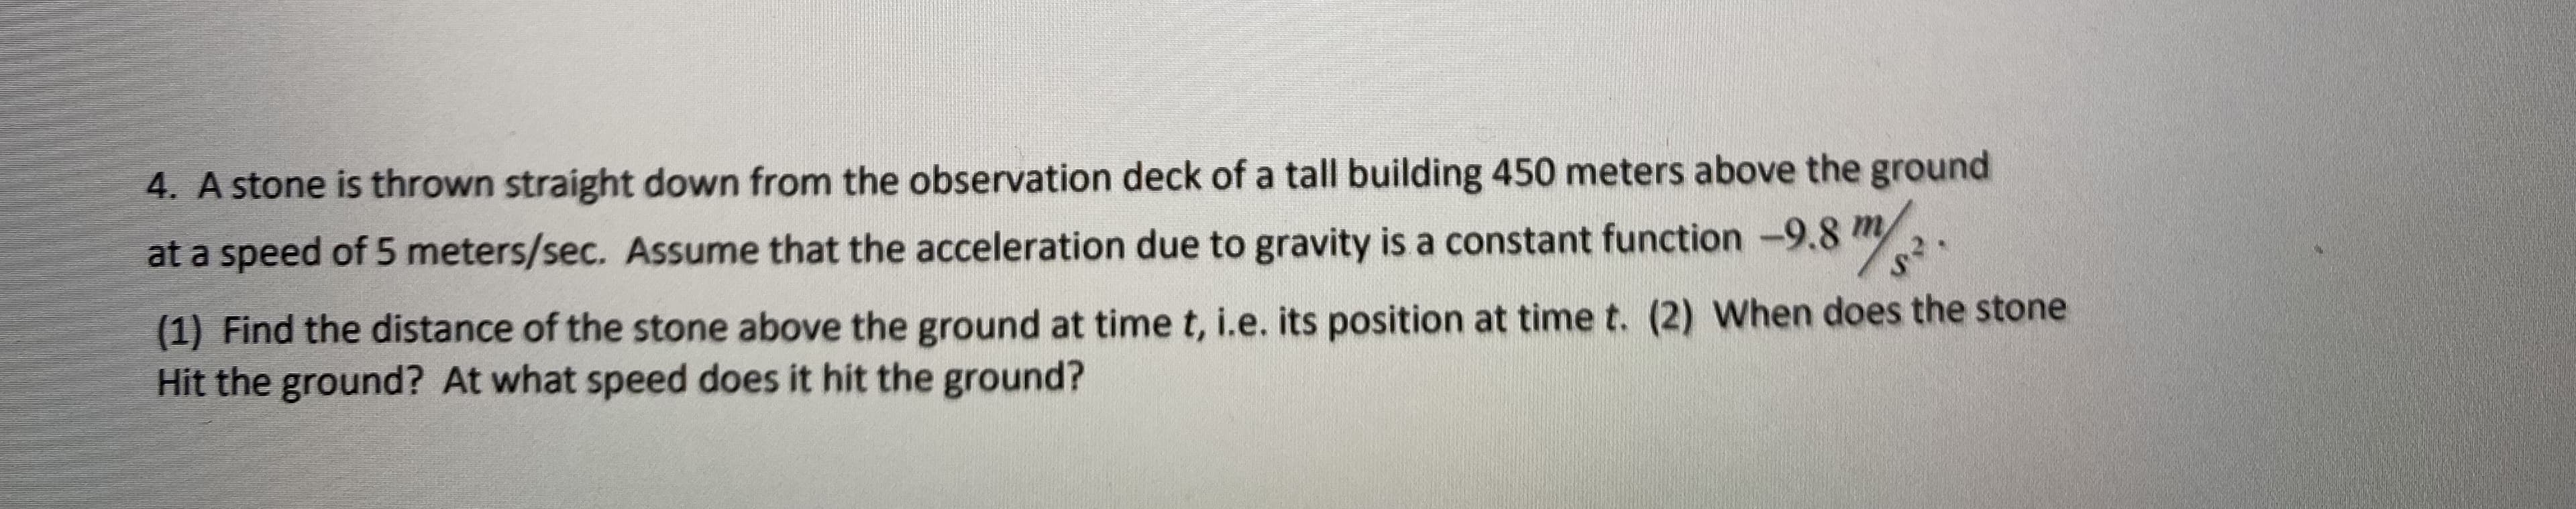 4. A stone is thrown straight down from the observation deck of a tall building 450 meters above the ground
at a speed of 5 meters/sec. Assume that the acceleration due to gravity is a constant function -9.8 m2.
(1) Find the distance of the stone above the ground at time t, i.e. its position at time t. (2) When does the stone
Hit the ground? At what speed does it hit the ground?
